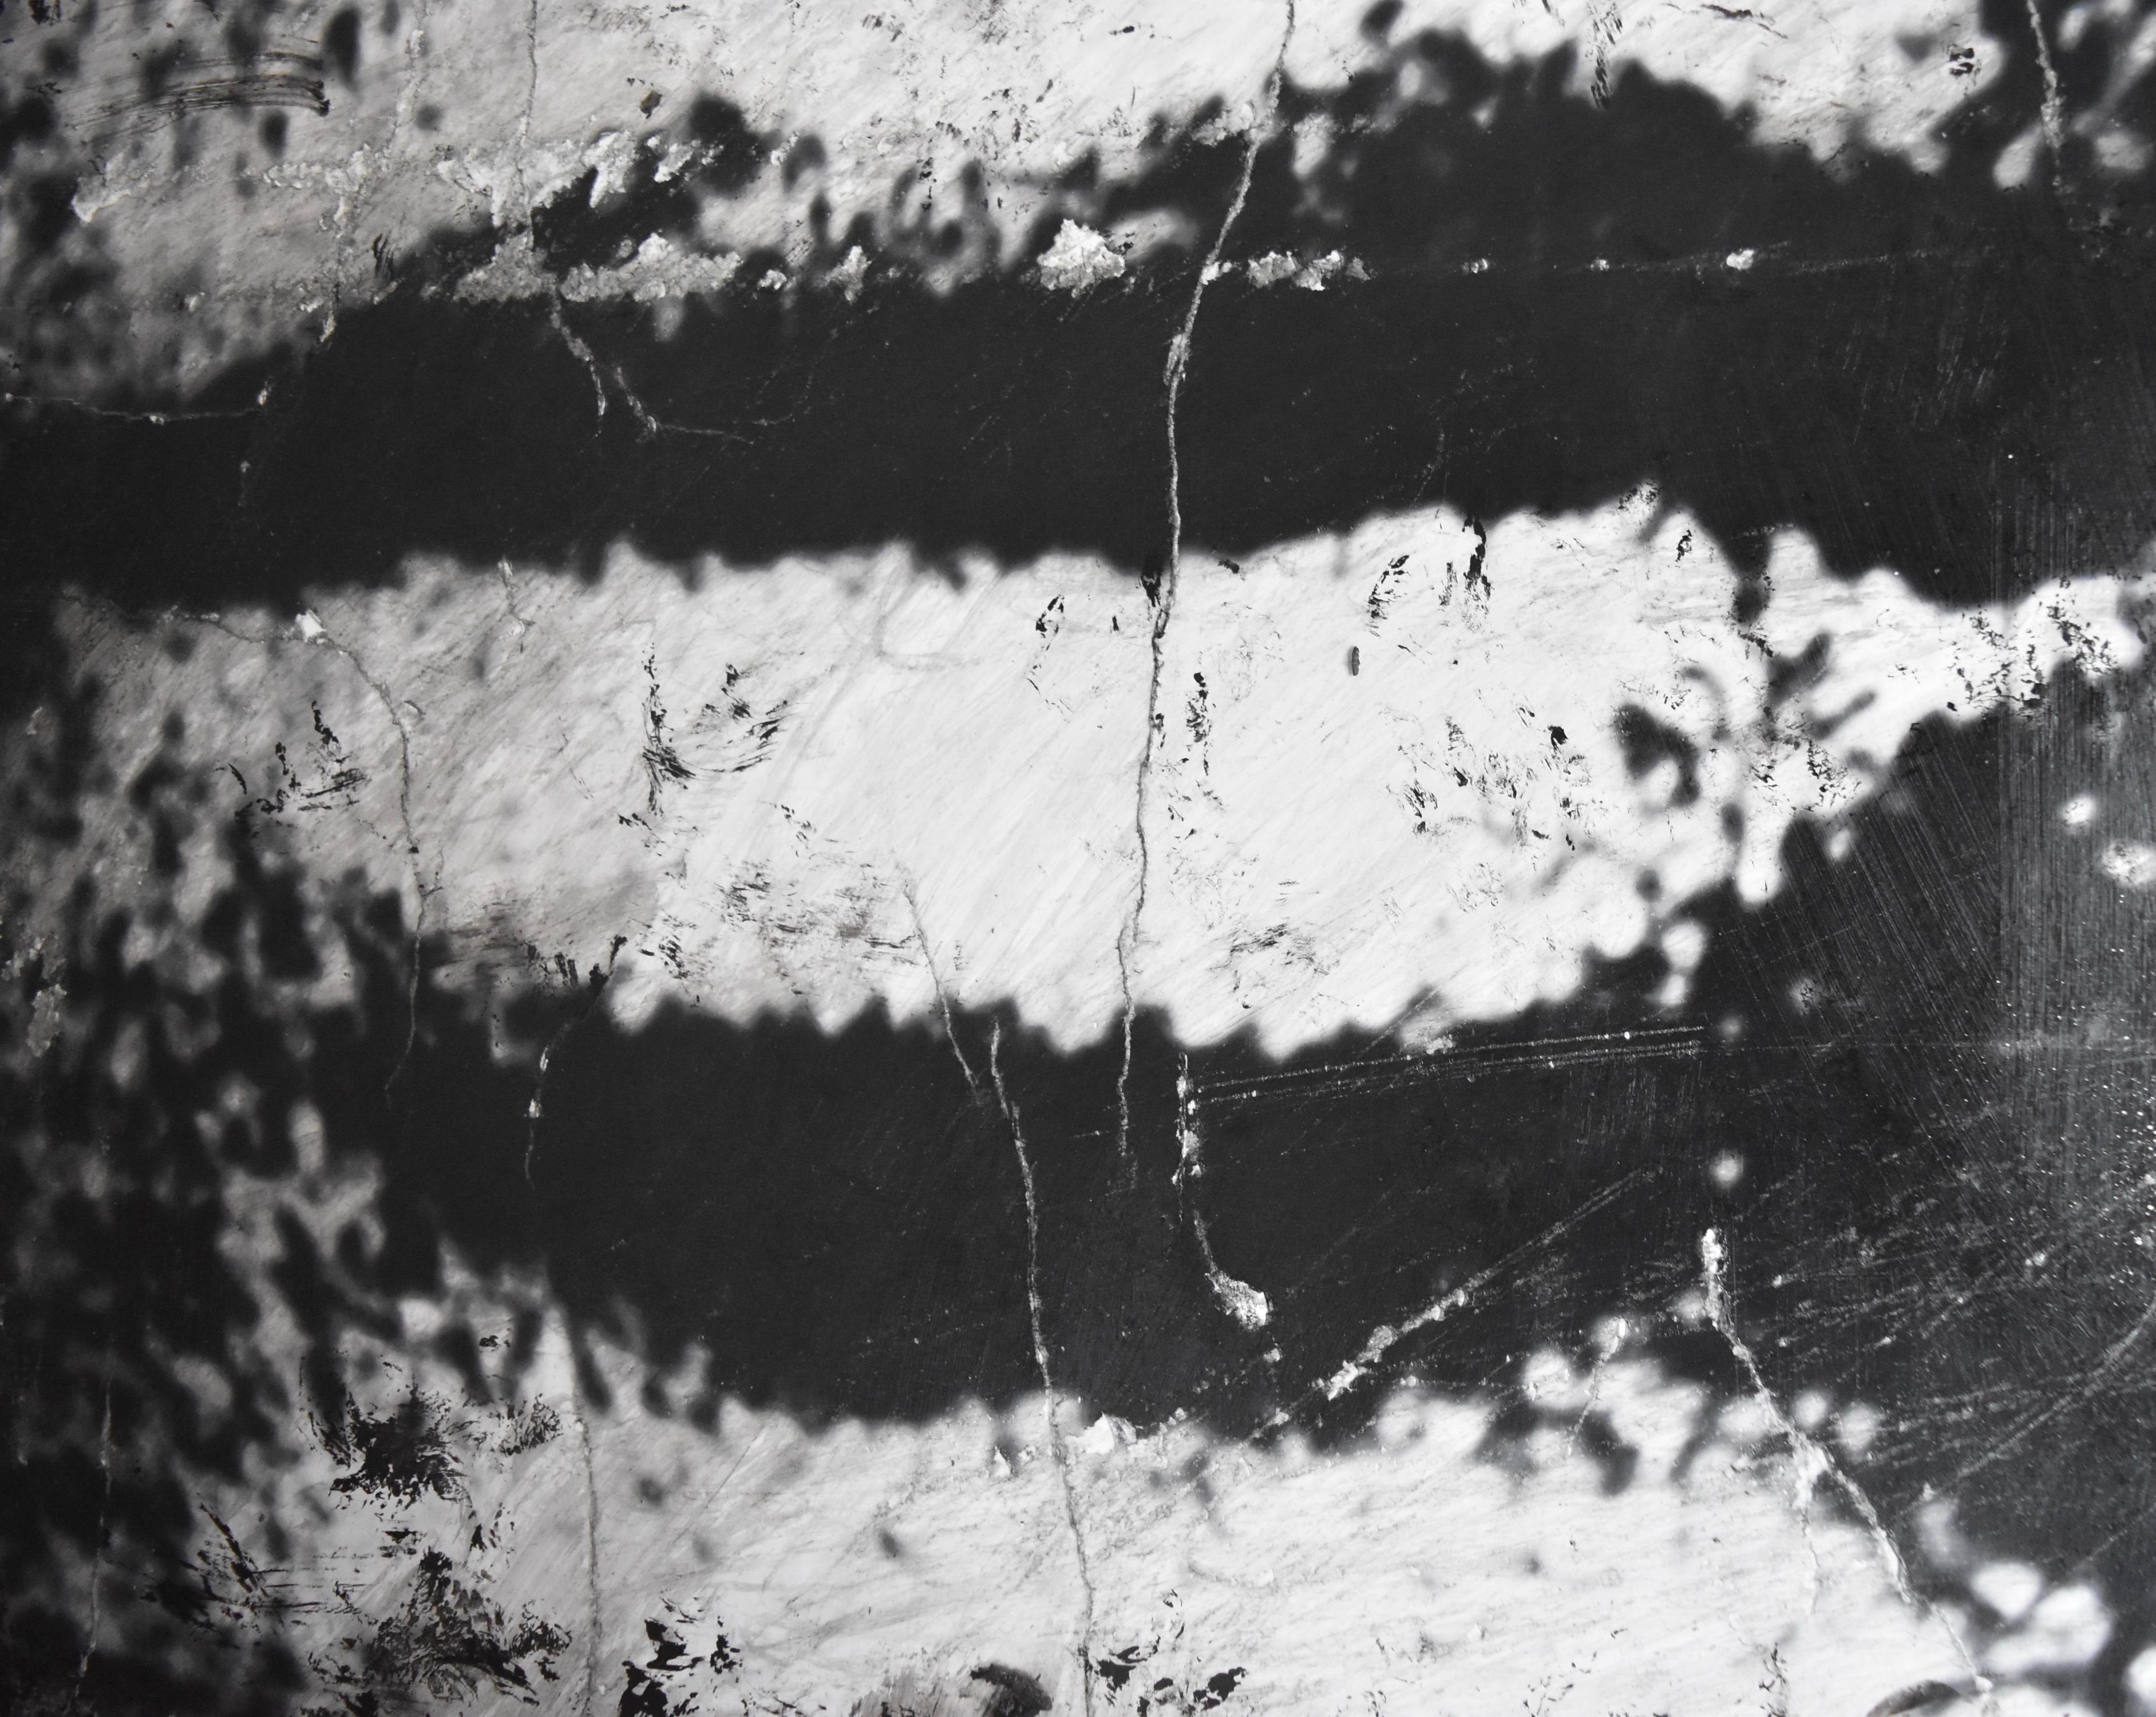 Hand-Painted Italian Pop Artist Anna Bianchi’s Lenny Kravits Abstract Black and White Acrylic